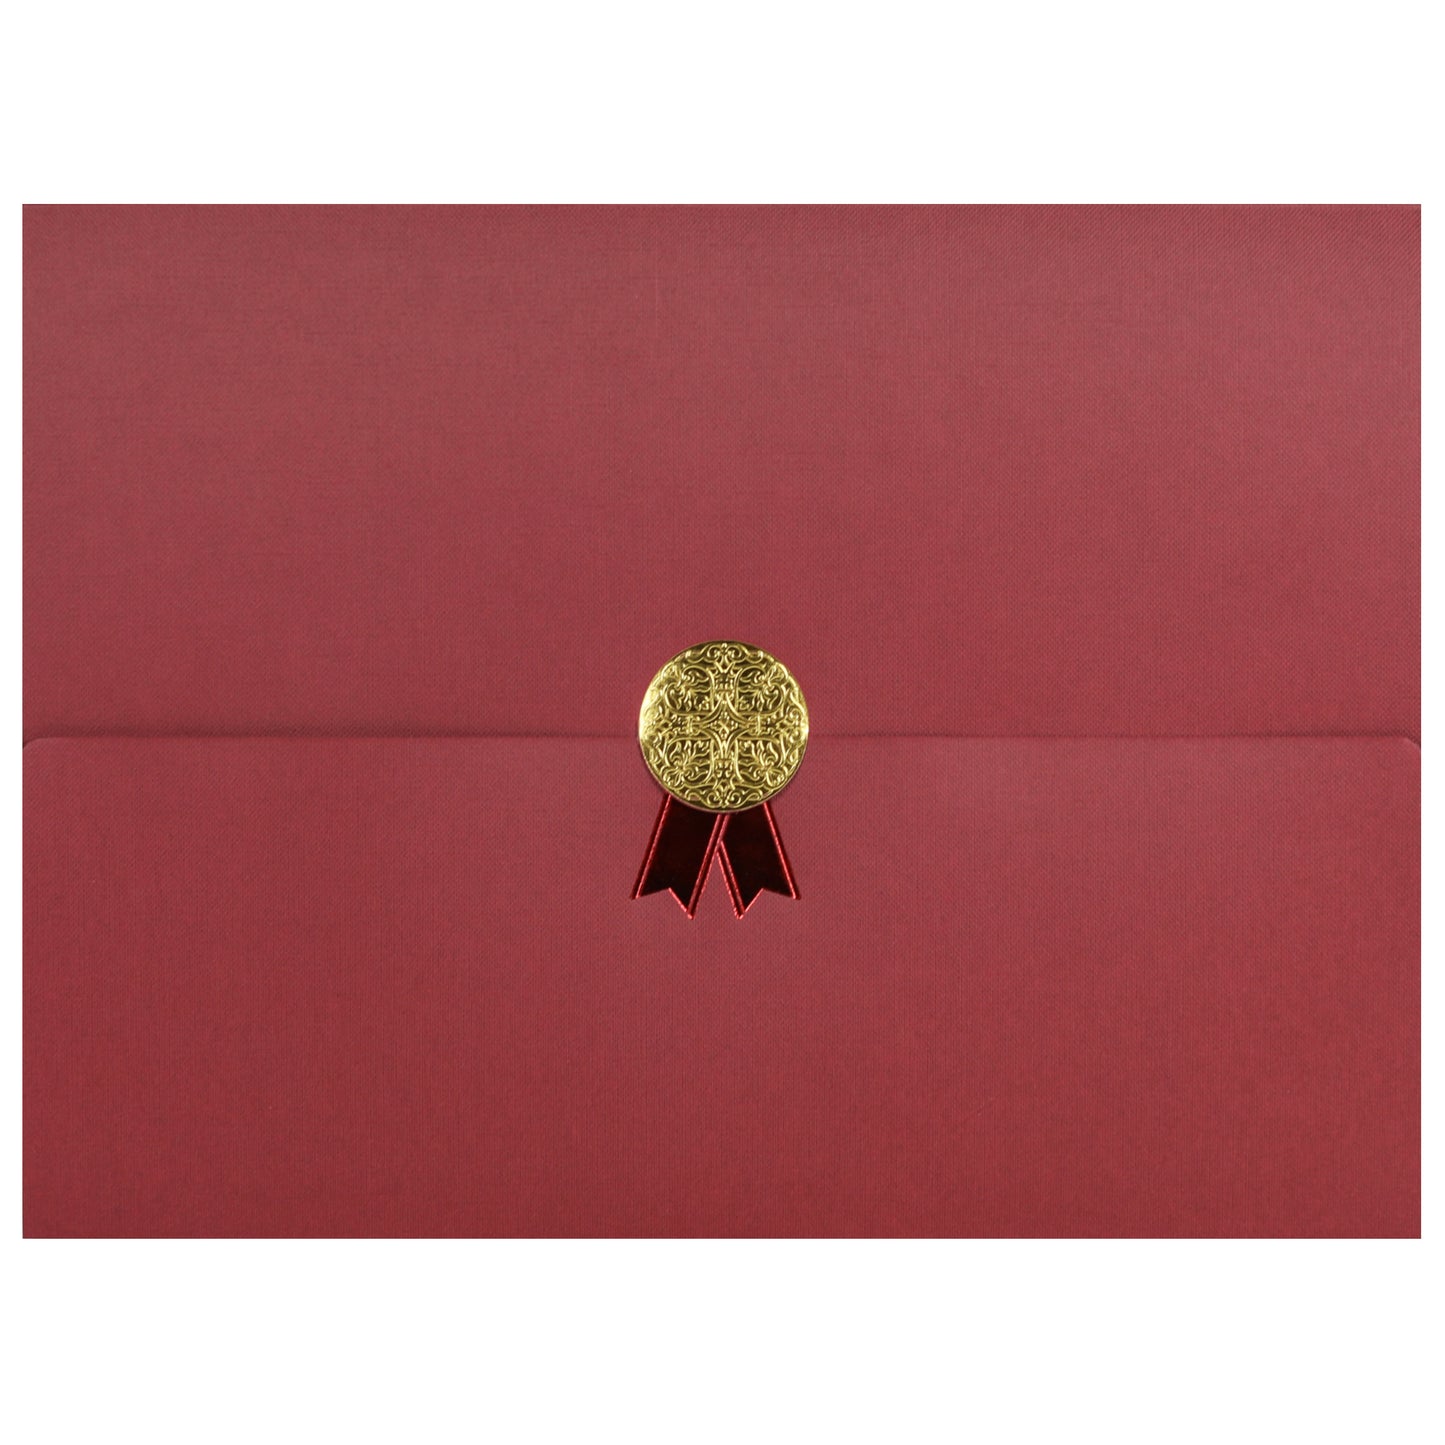 St. James® Certificate Holders/Document Covers/Diploma Holders, Burgundy, Gold Award Seal with Red Ribbon, Pack of 5, 83818